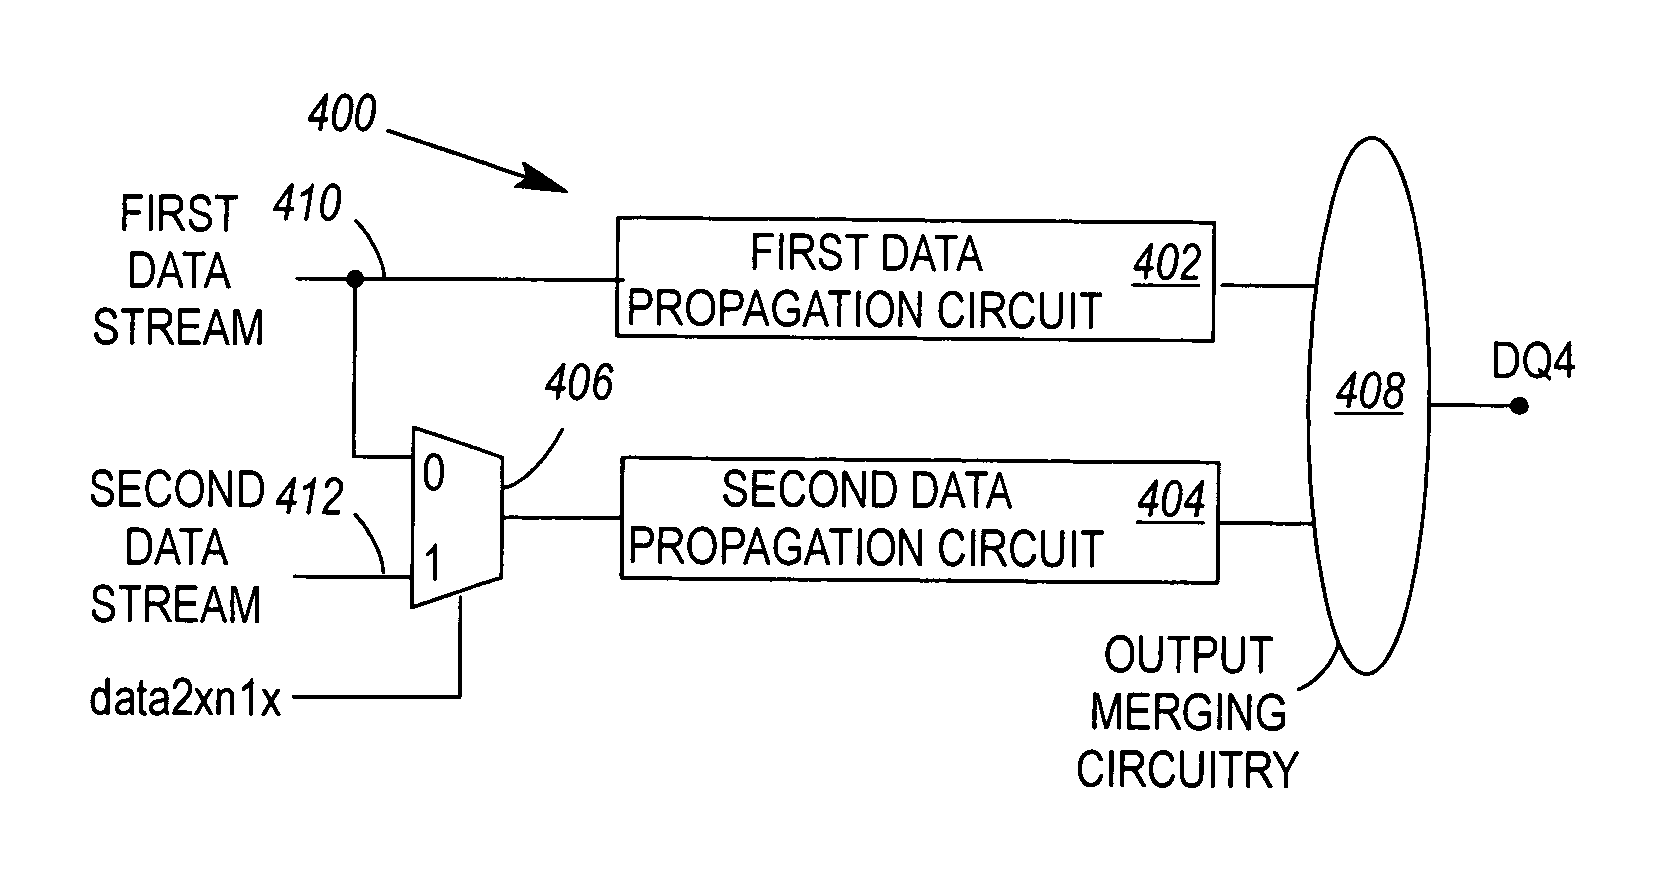 Memory controller driver circuitry having a multiplexing stage to provide data to at least N-1 of N data propagation circuits, and having output merging circuitry to alternately couple the N data propagation circuits to a data pad to generate either a 1x or Mx stream of data